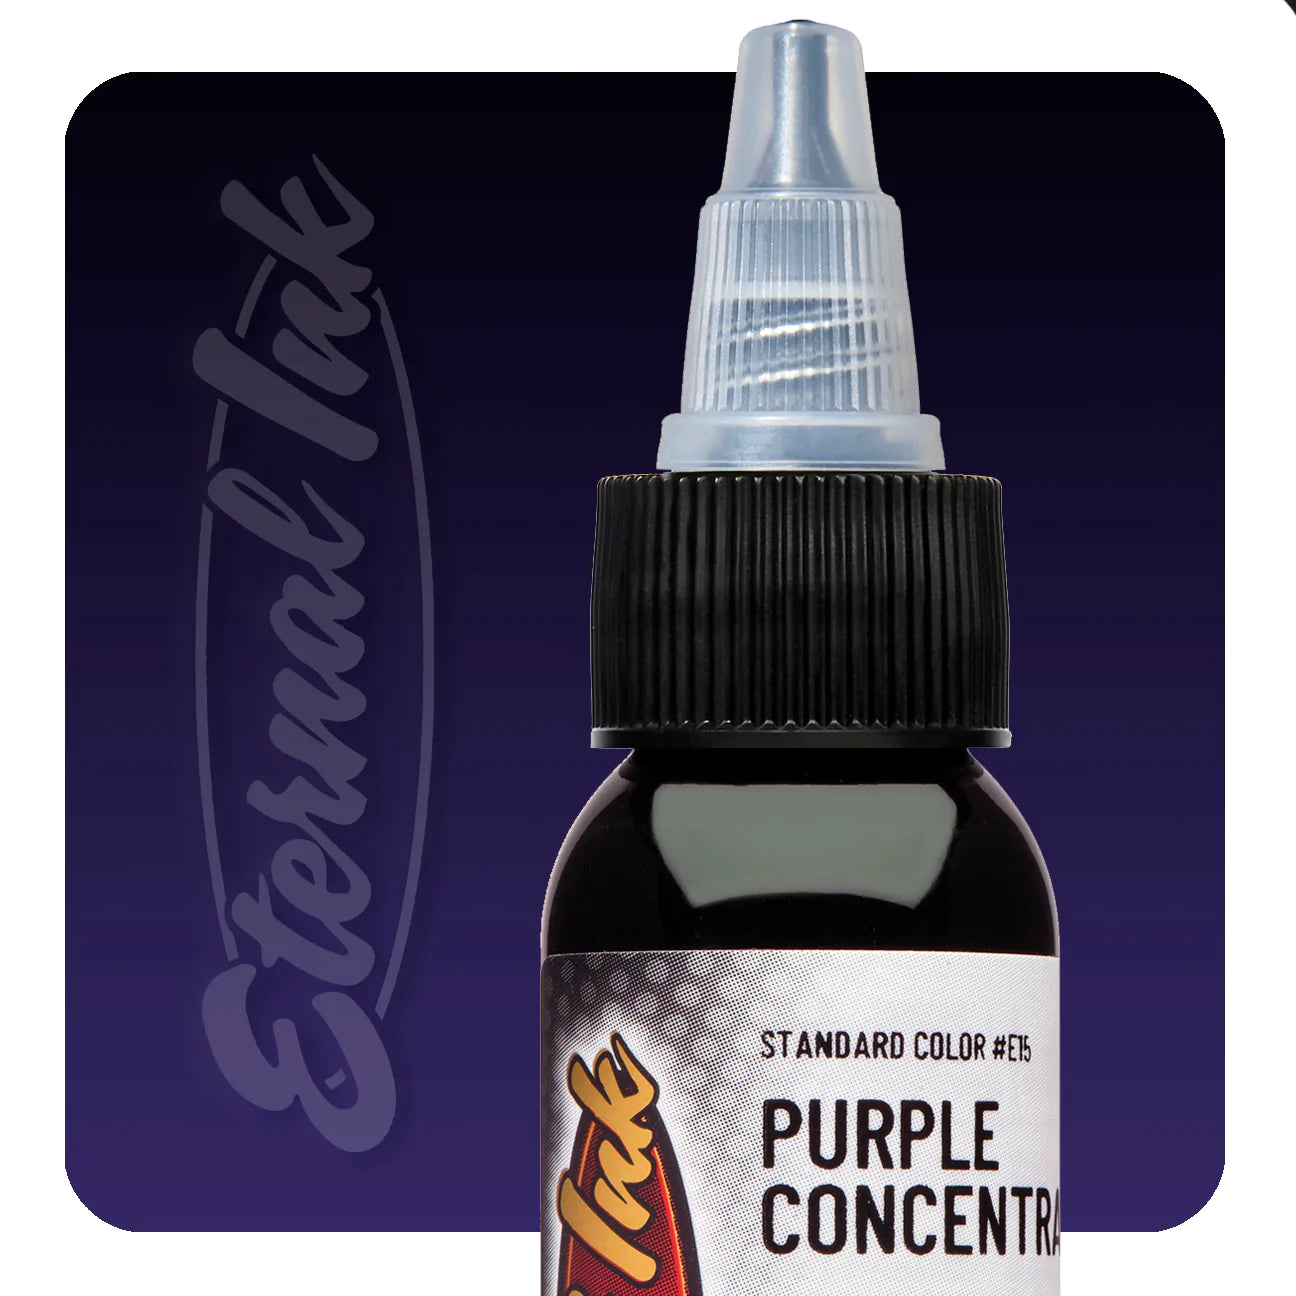 Eternal Purple Concentrate Tattoo Ink